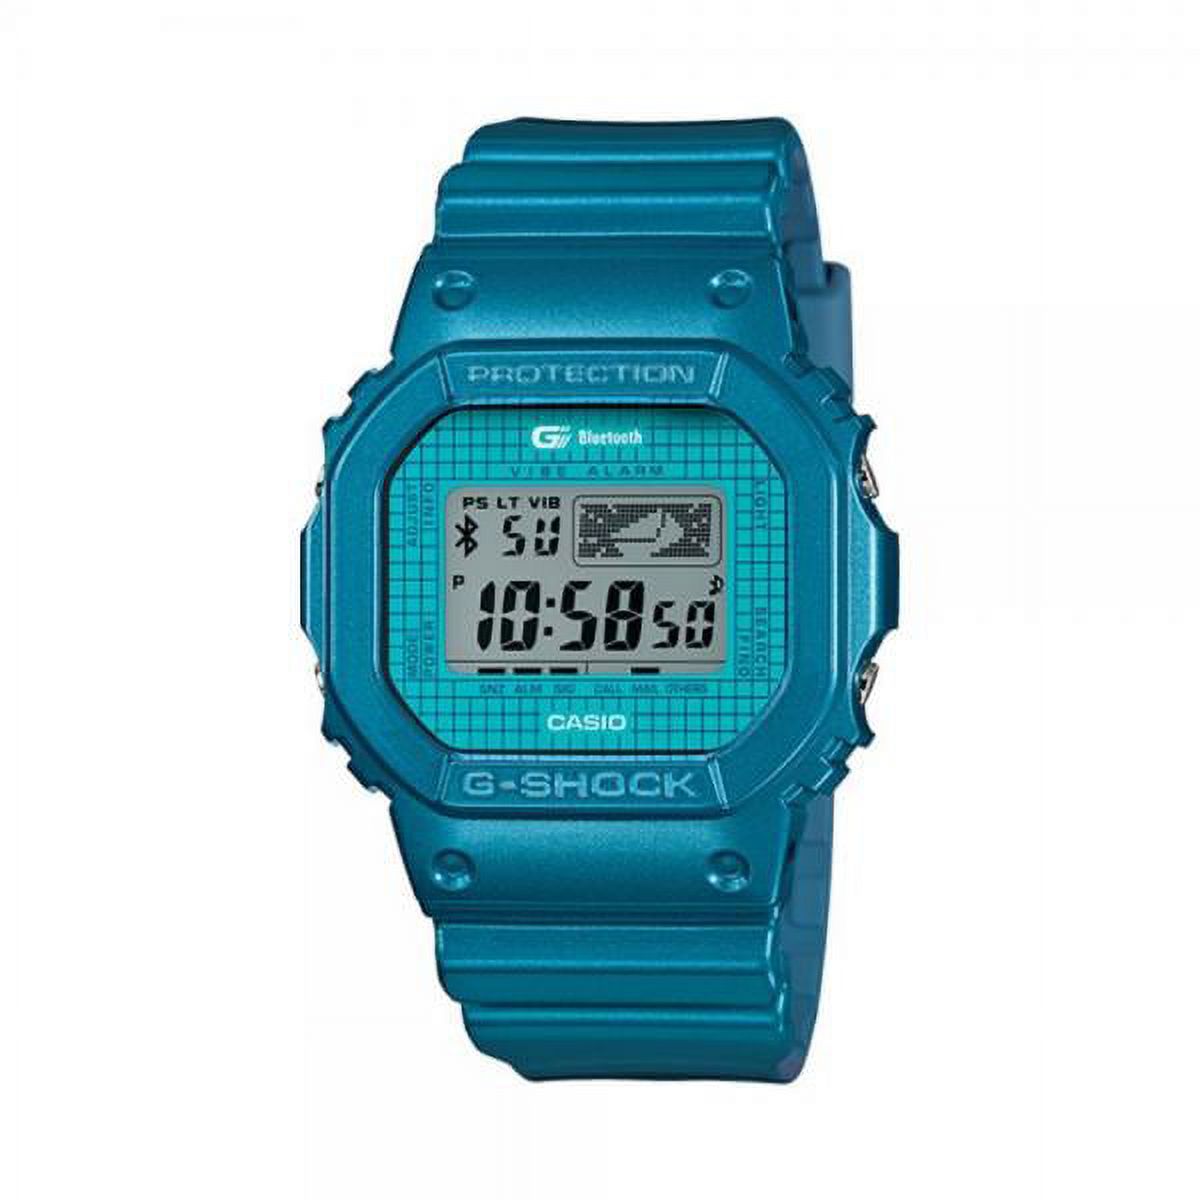 Casio G-Shock GB5600B-2 Bluetooth 4.0 Digital Blue Resin Watch Compatible with Iphone / Galaxy - image 1 of 1